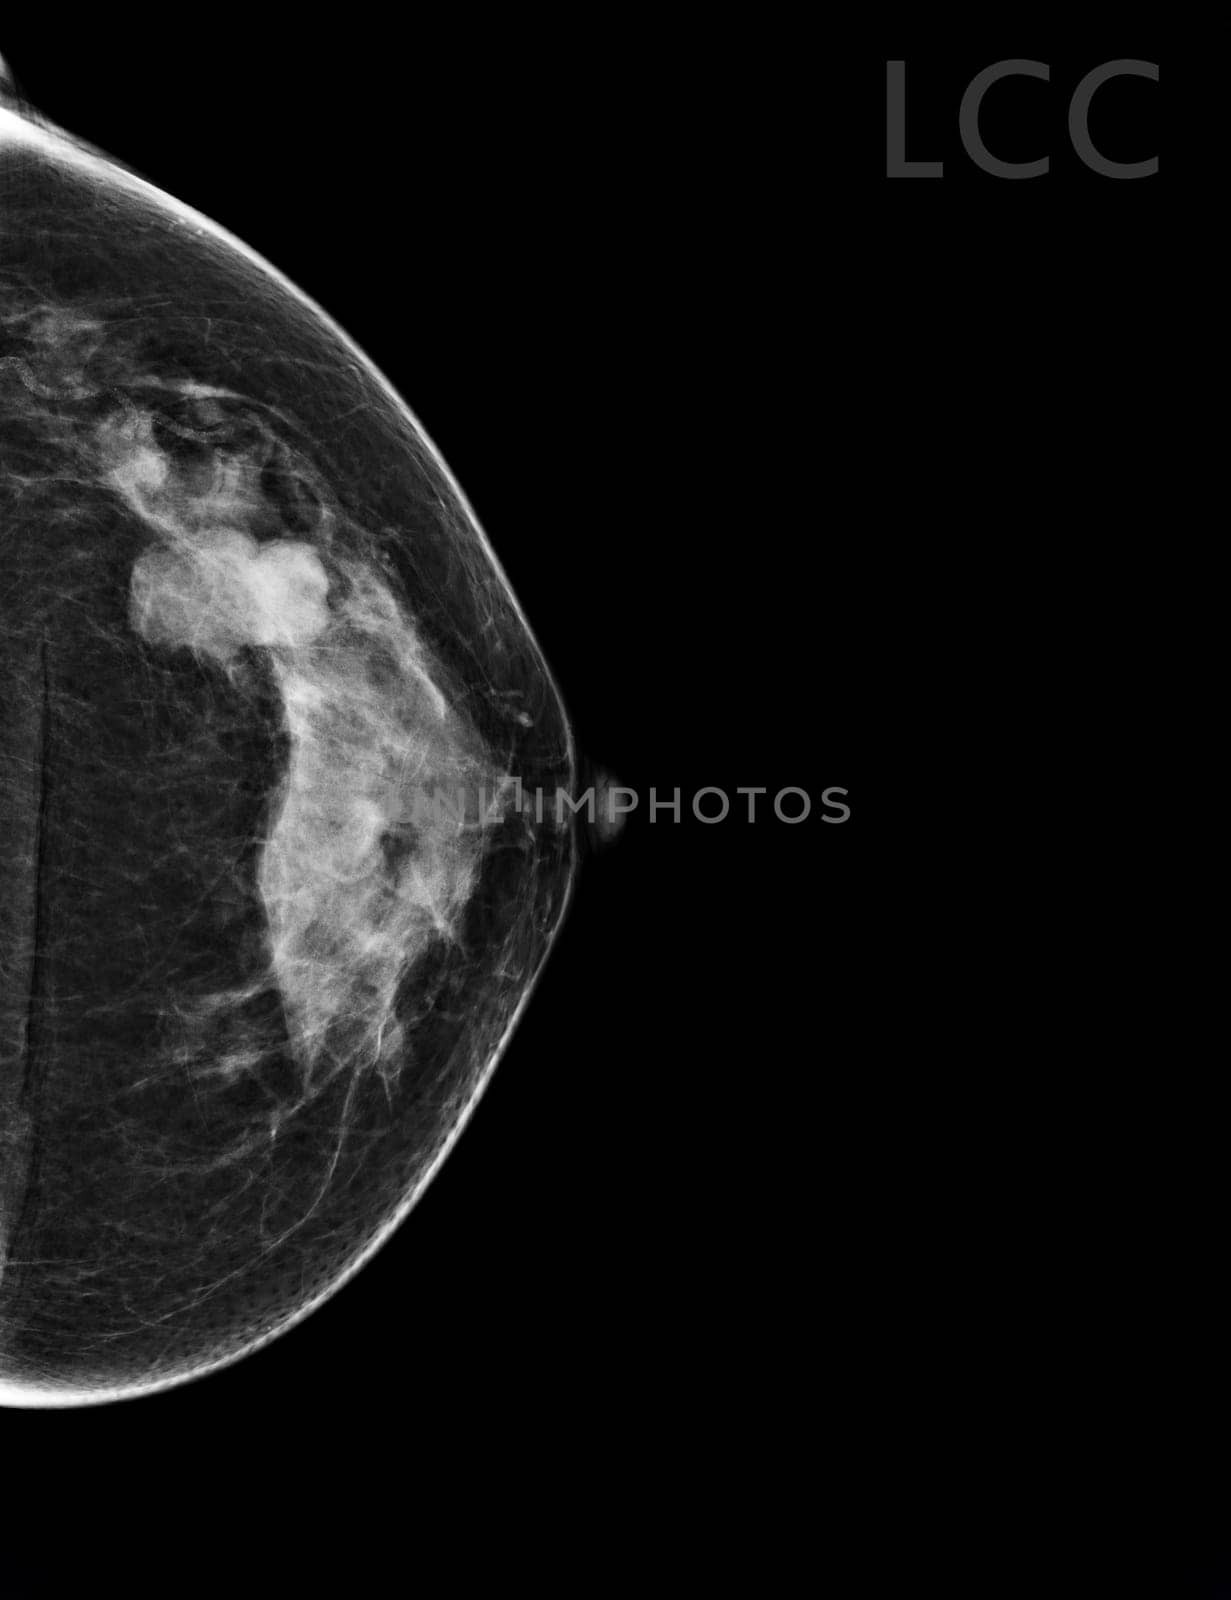 X-ray Digital Mammogram Left side CC view . mammography or breast scan for Breast cancer BI-RADS 5; Highly suggestive of malignancy .